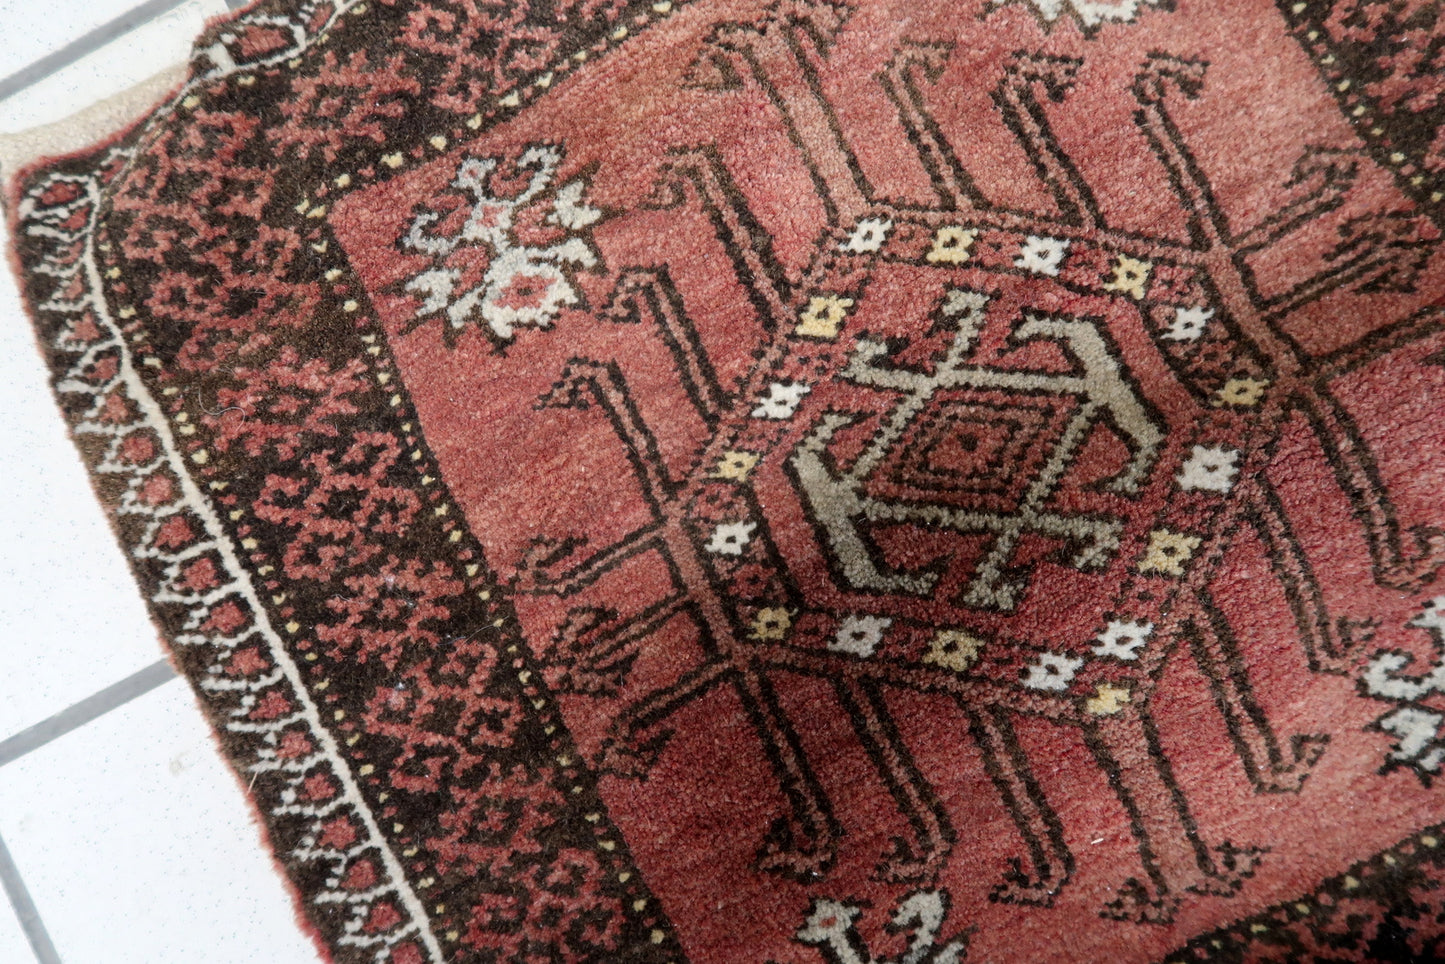 Close-up of the geometric motifs woven into the fabric of the saddle bag